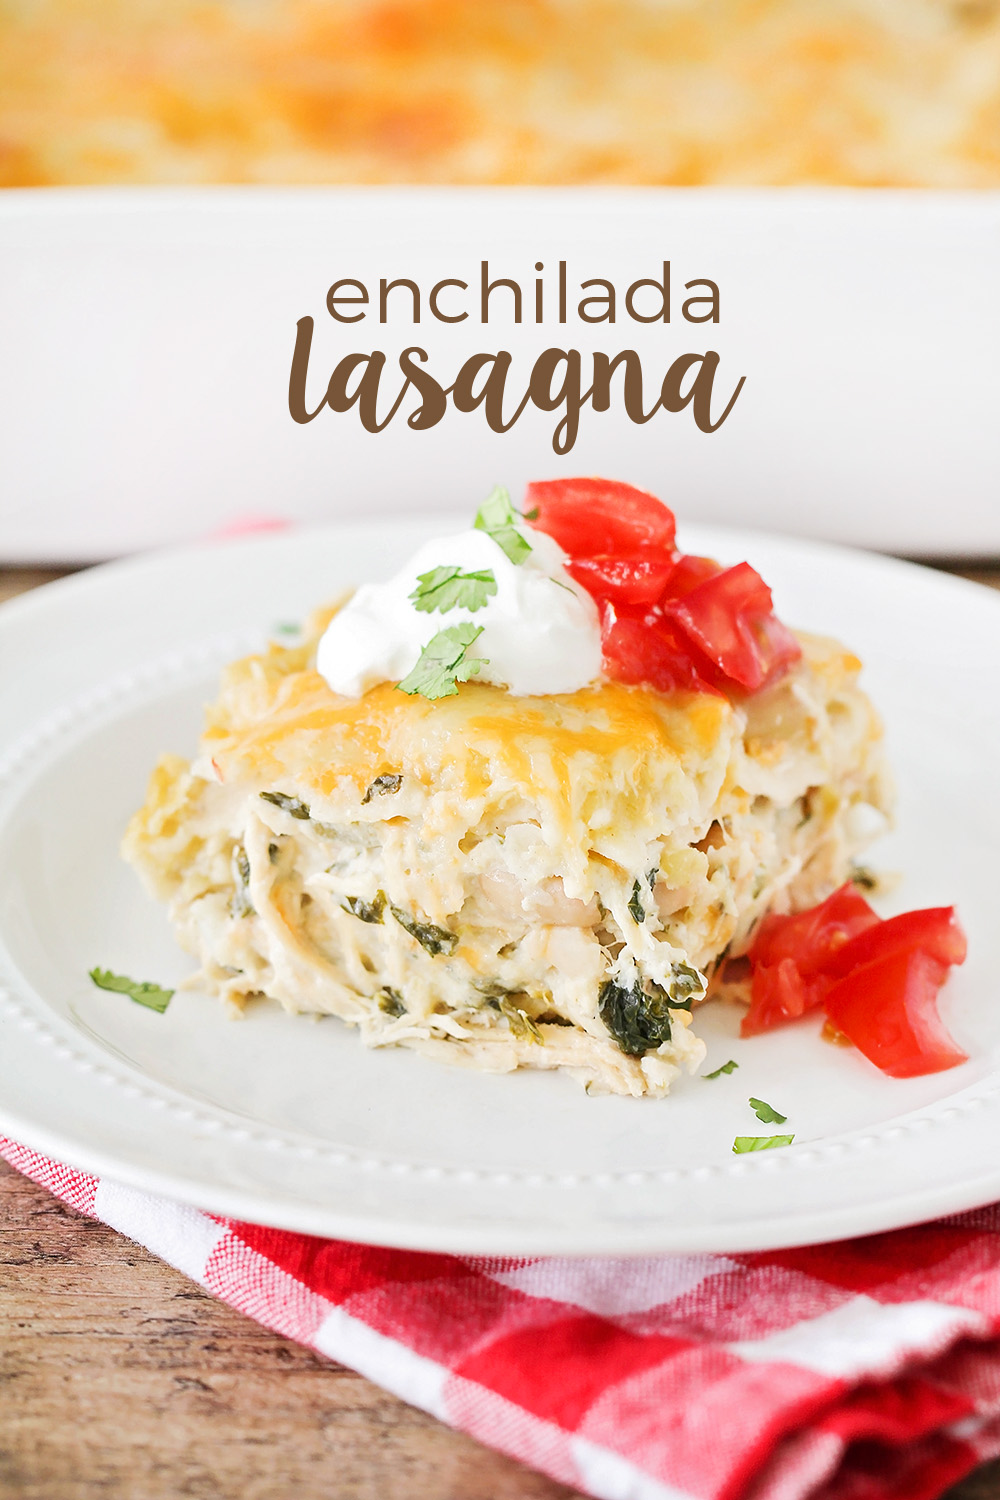 This creamy, cheesy, baked enchilada lasagna is so easy to make and so flavorful! It's a hearty and delicious meal that everyone will love!